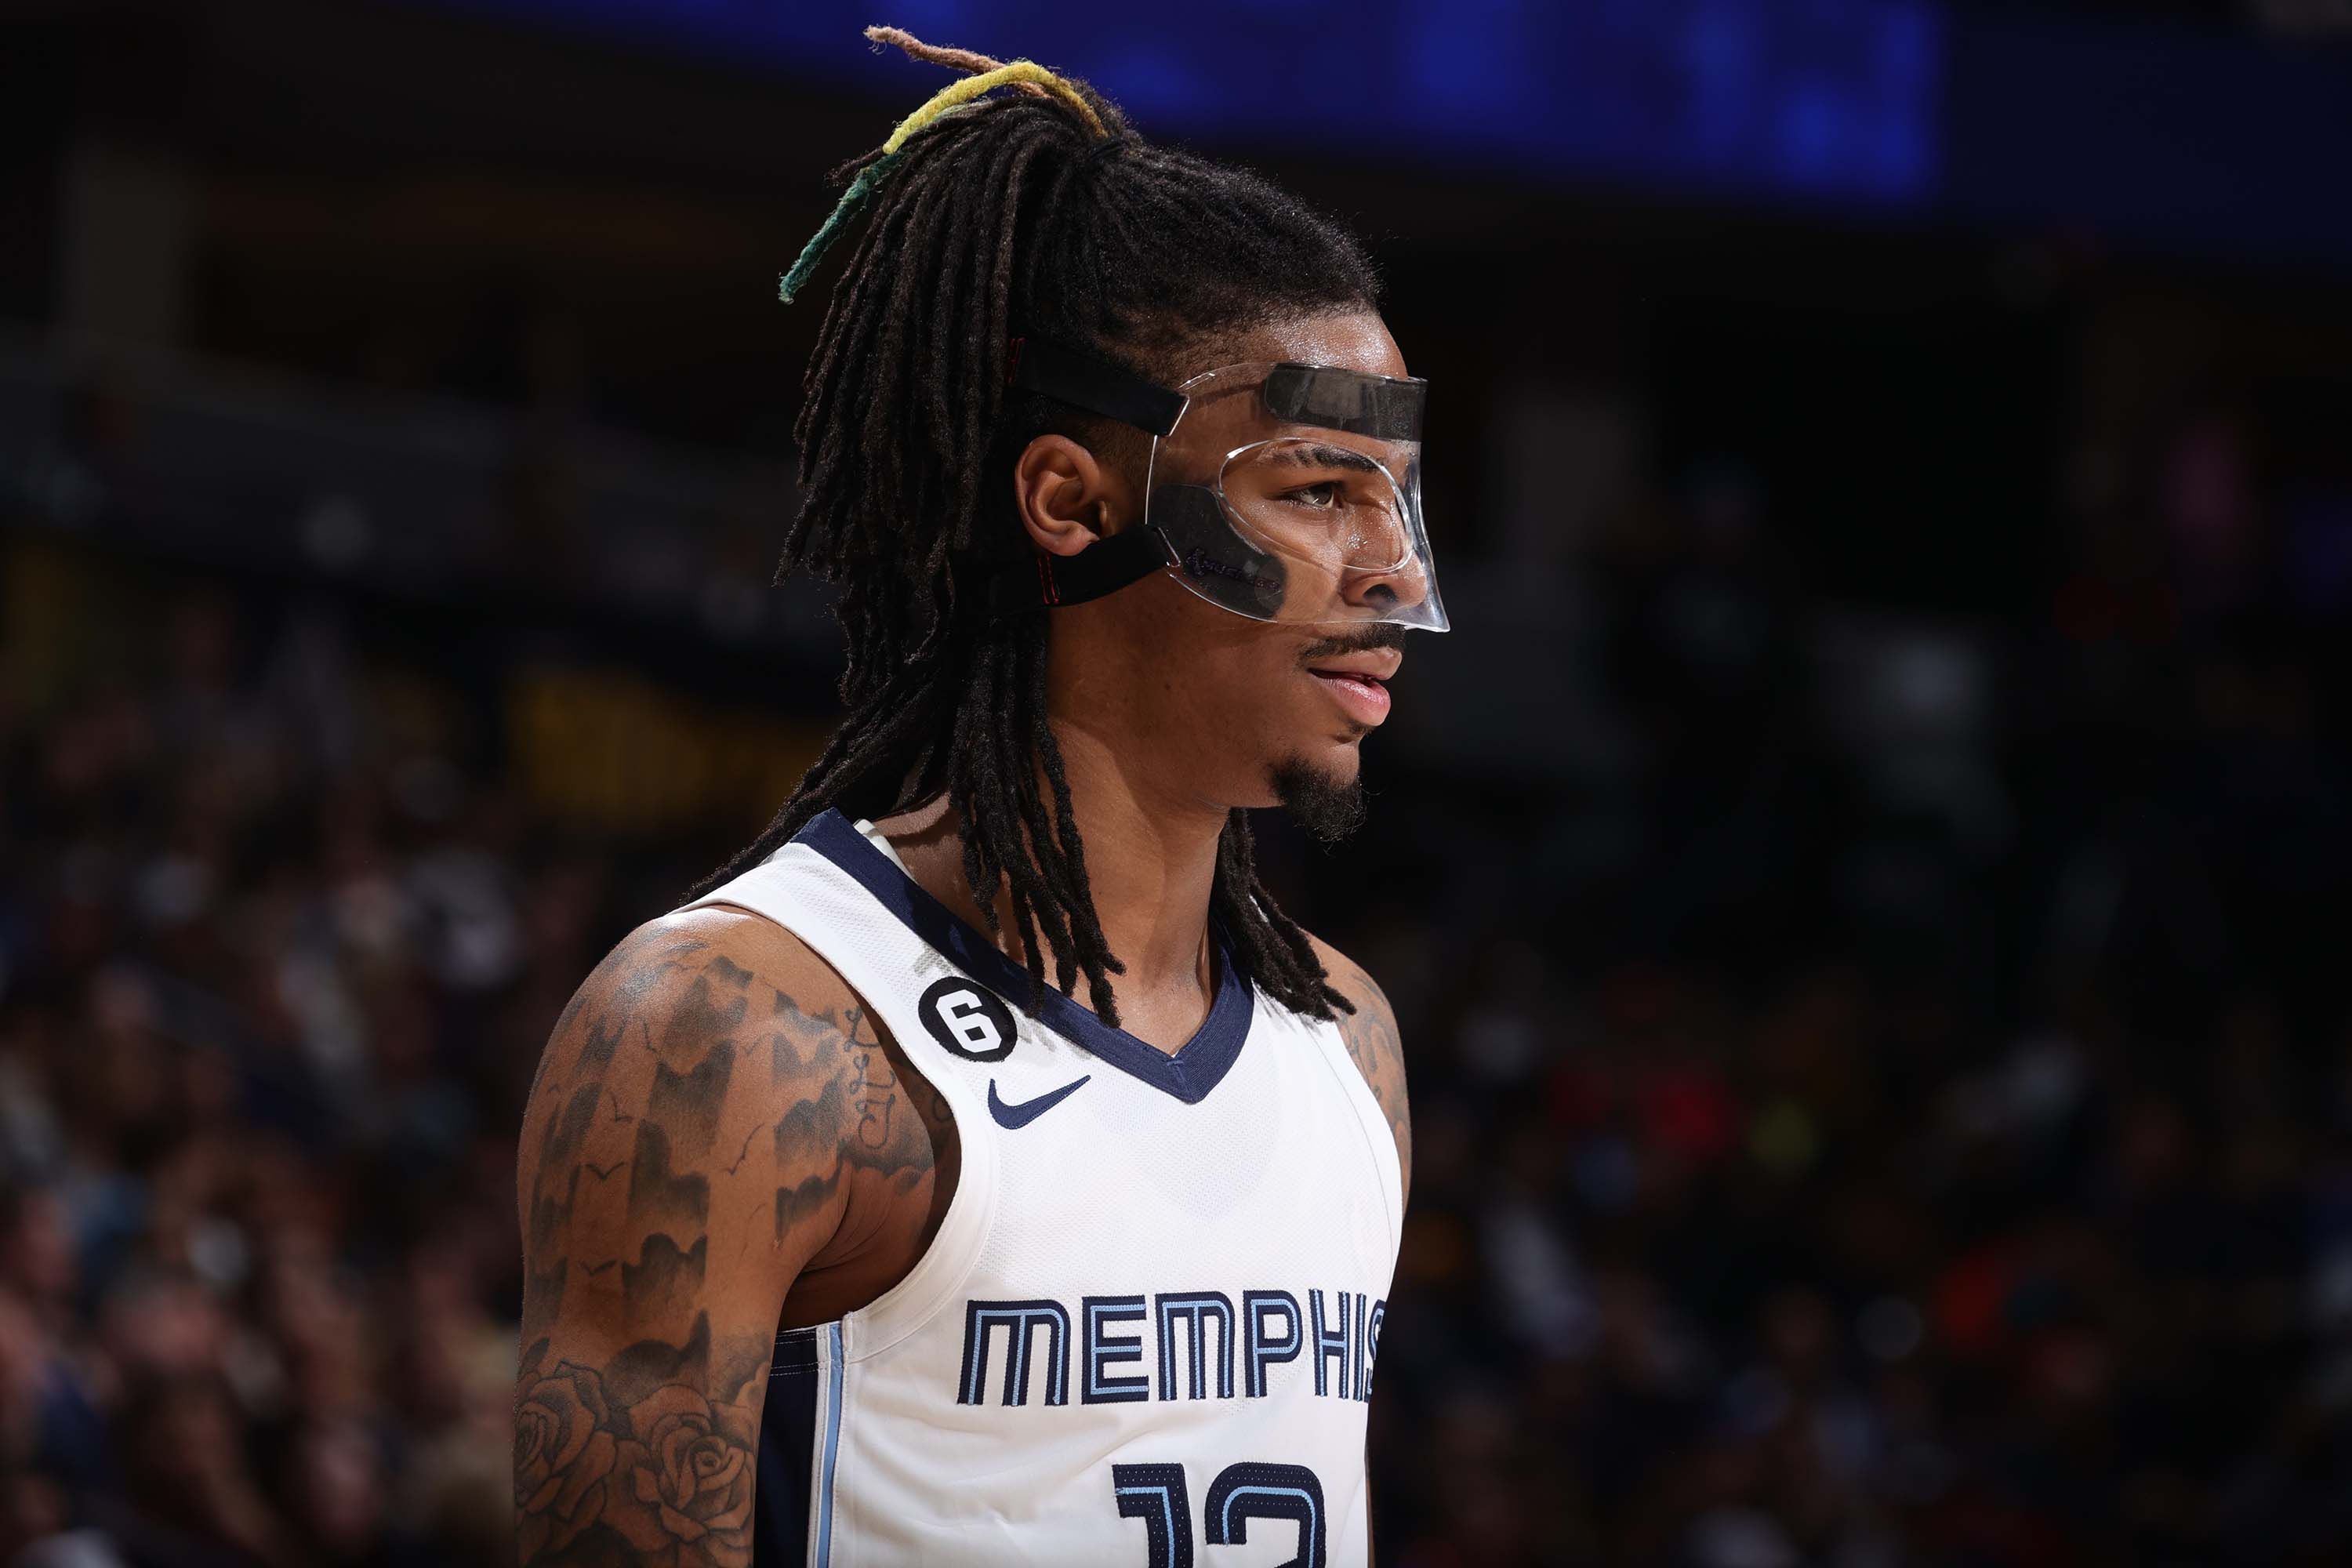 With Ja Morant suspended, so are Grizzlies' plans for NBA title